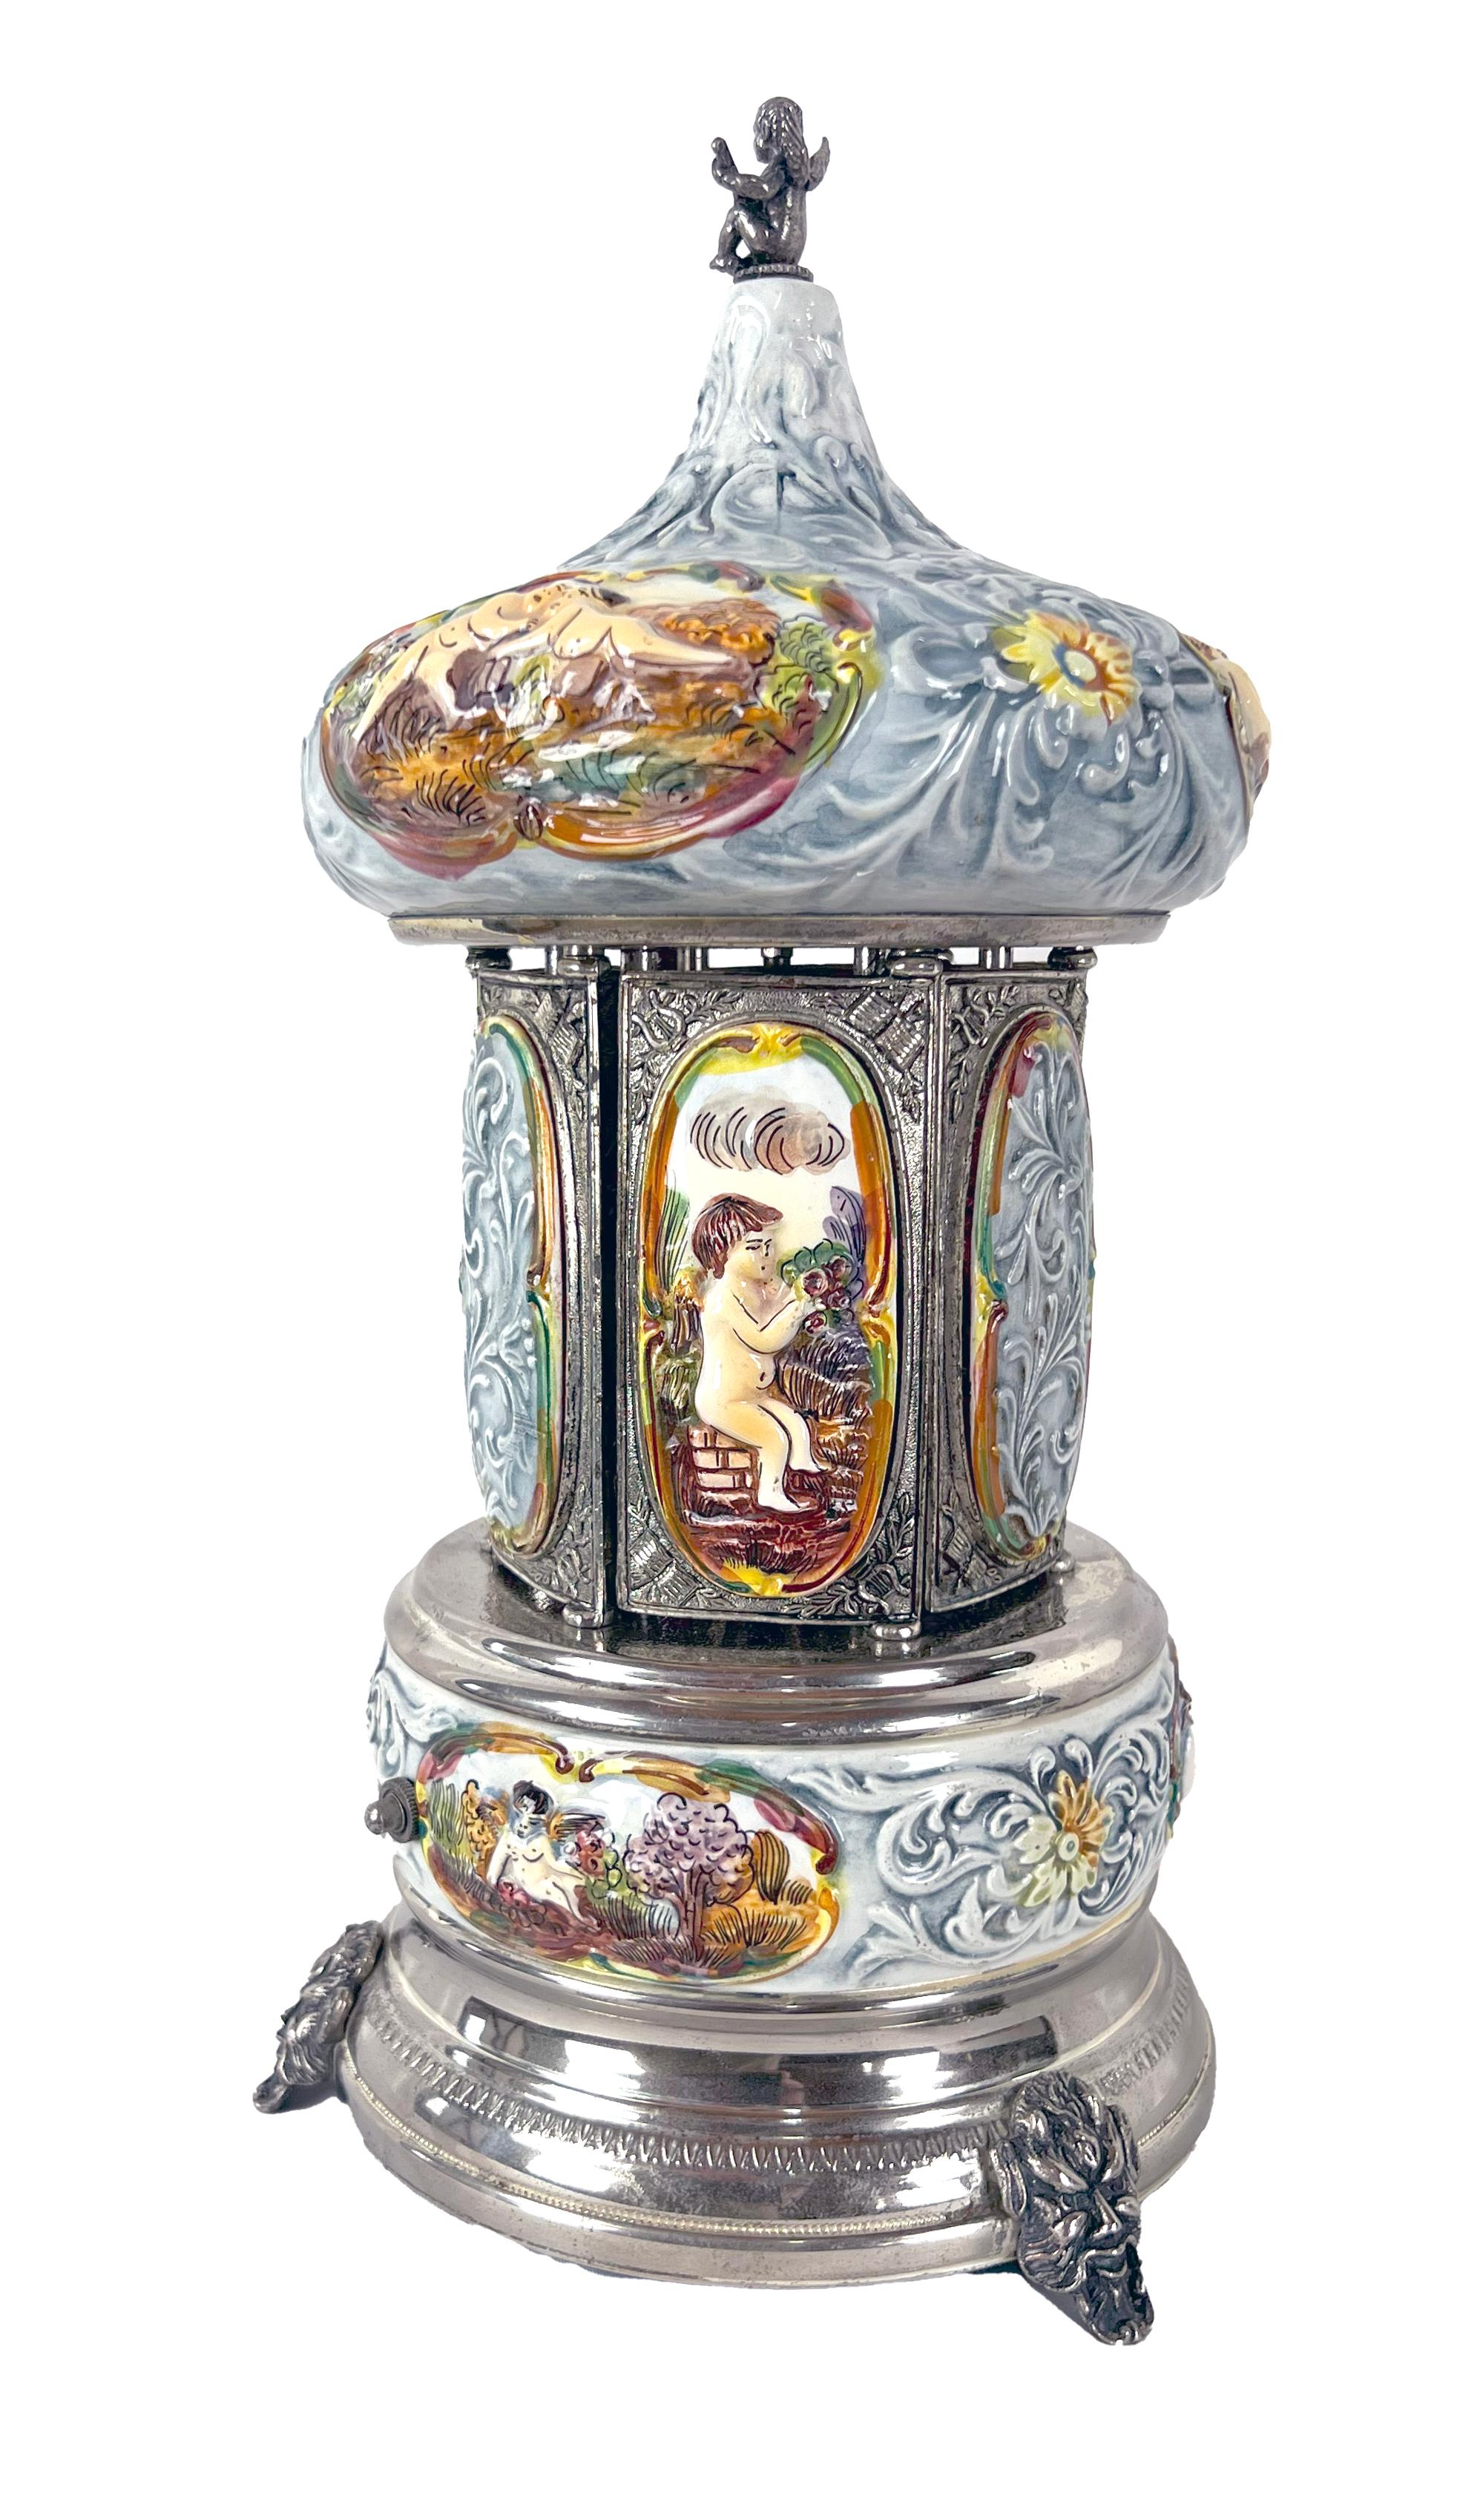 Simo, Florence Italy Musical Lipstick Carousel - Capodimonte Porcelain Cherubs

Italian lipstick carousel with a Porcelain works Simo, Florence Italy with a Swiss Reuge music box, and hand painted Capodimonte porcelain cherubs. Silver plated.